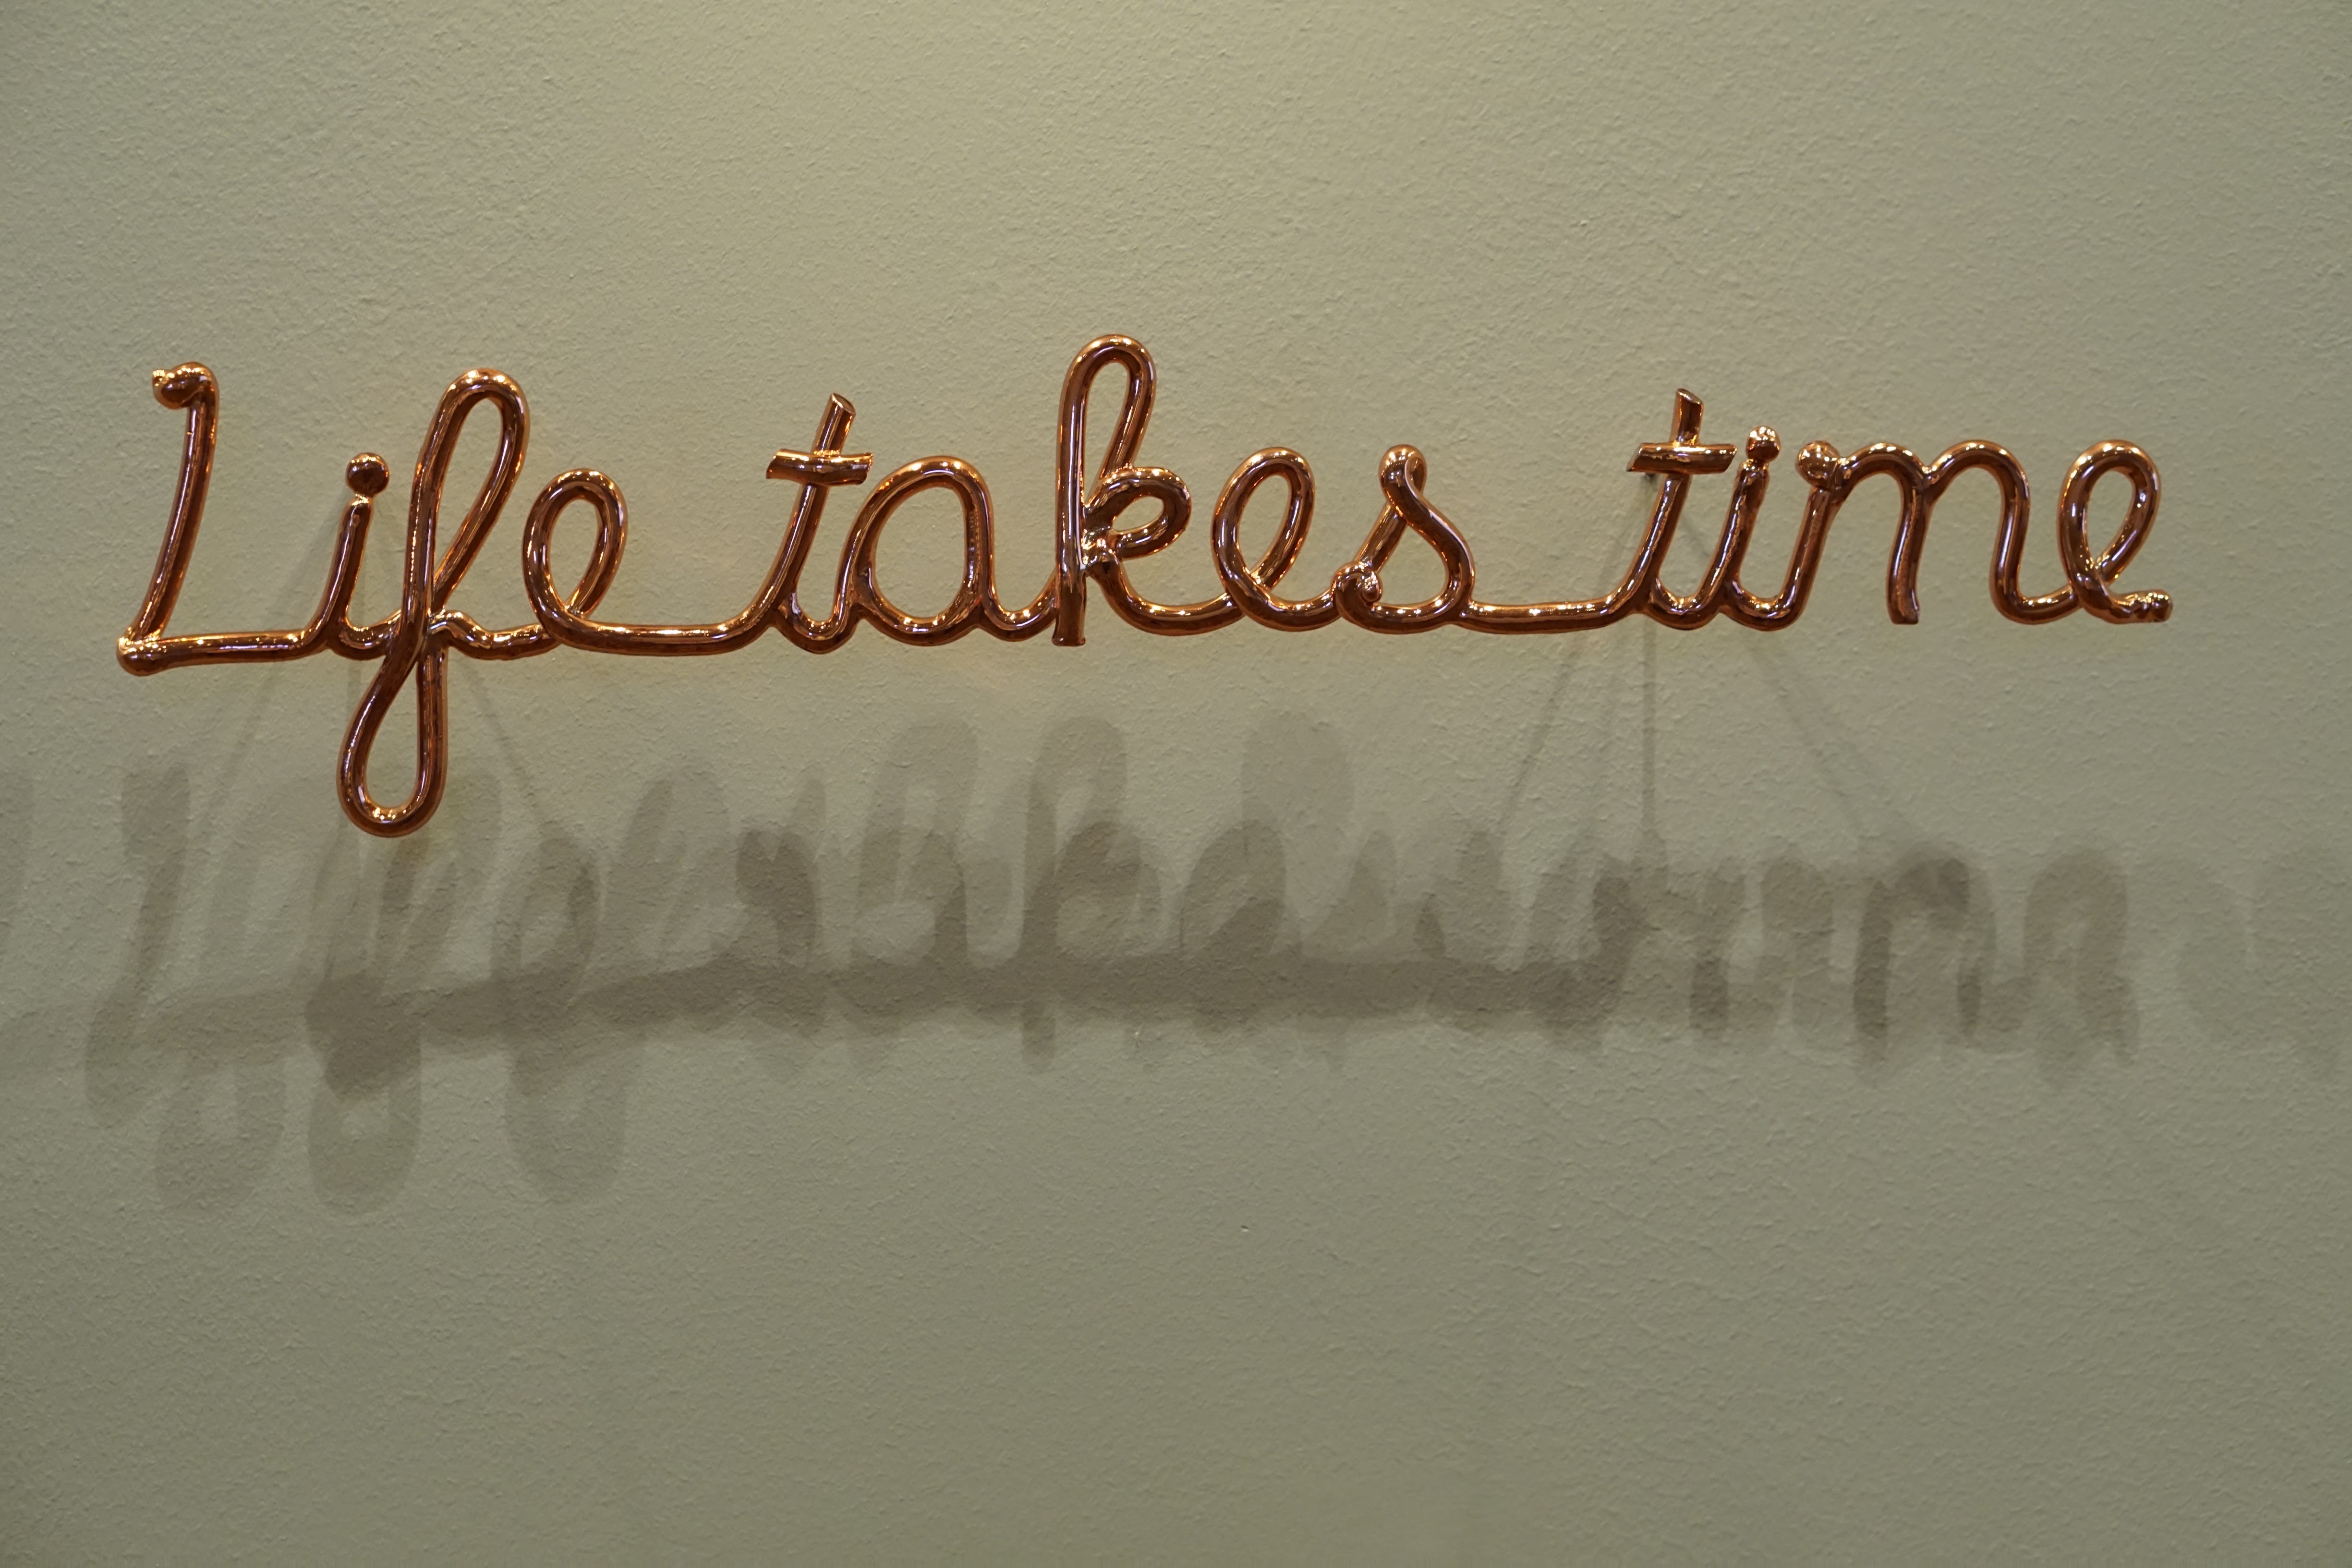 Life Takes Time, Life, Sign, Text, Time, HQ Photo